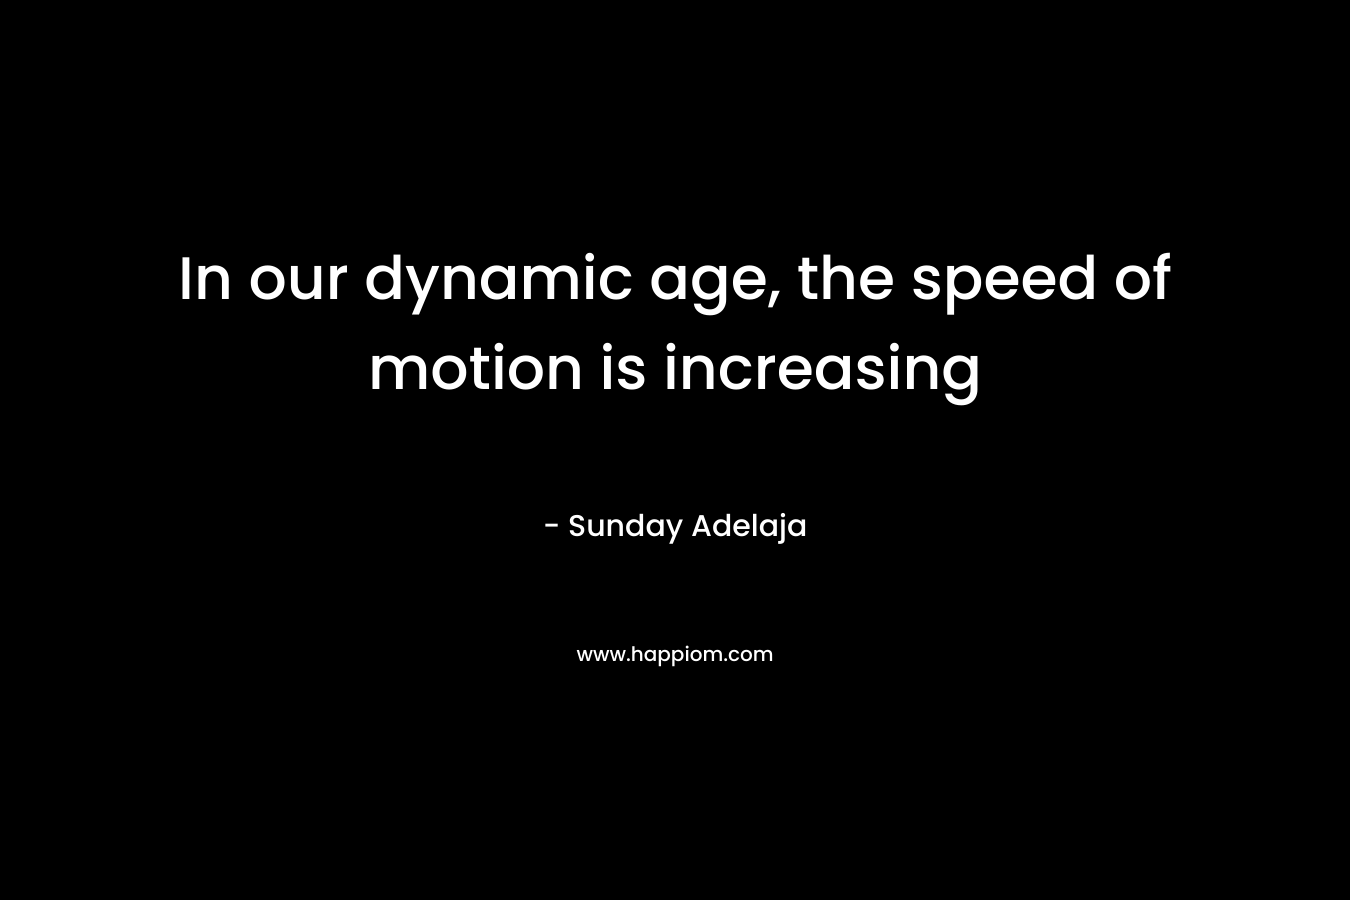 In our dynamic age, the speed of motion is increasing